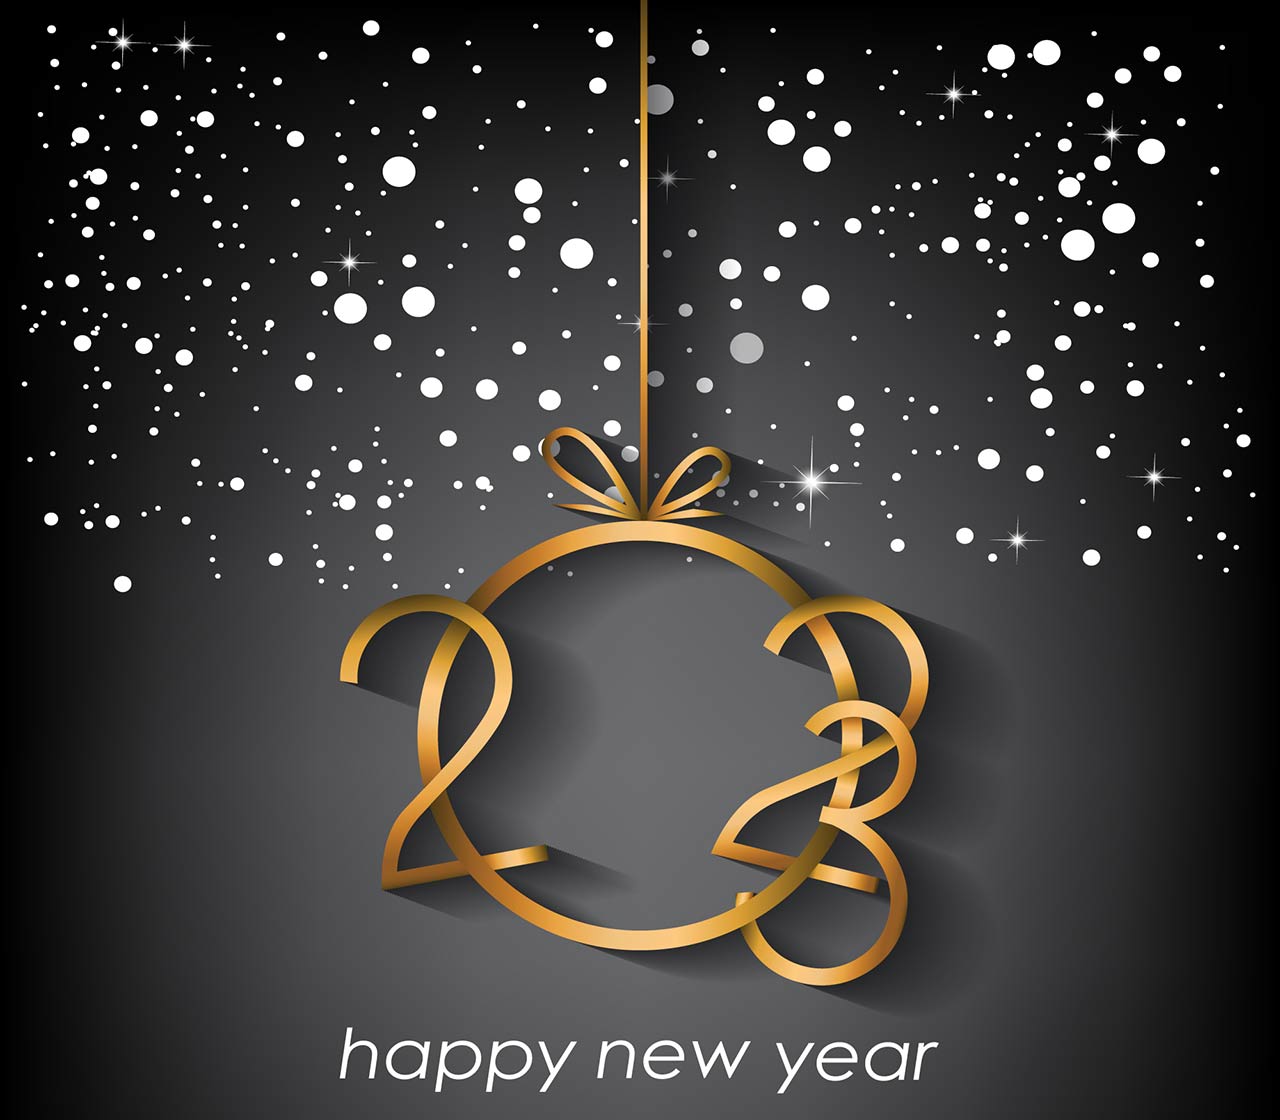 Image of 2023 Happy New Year lettering with festive background